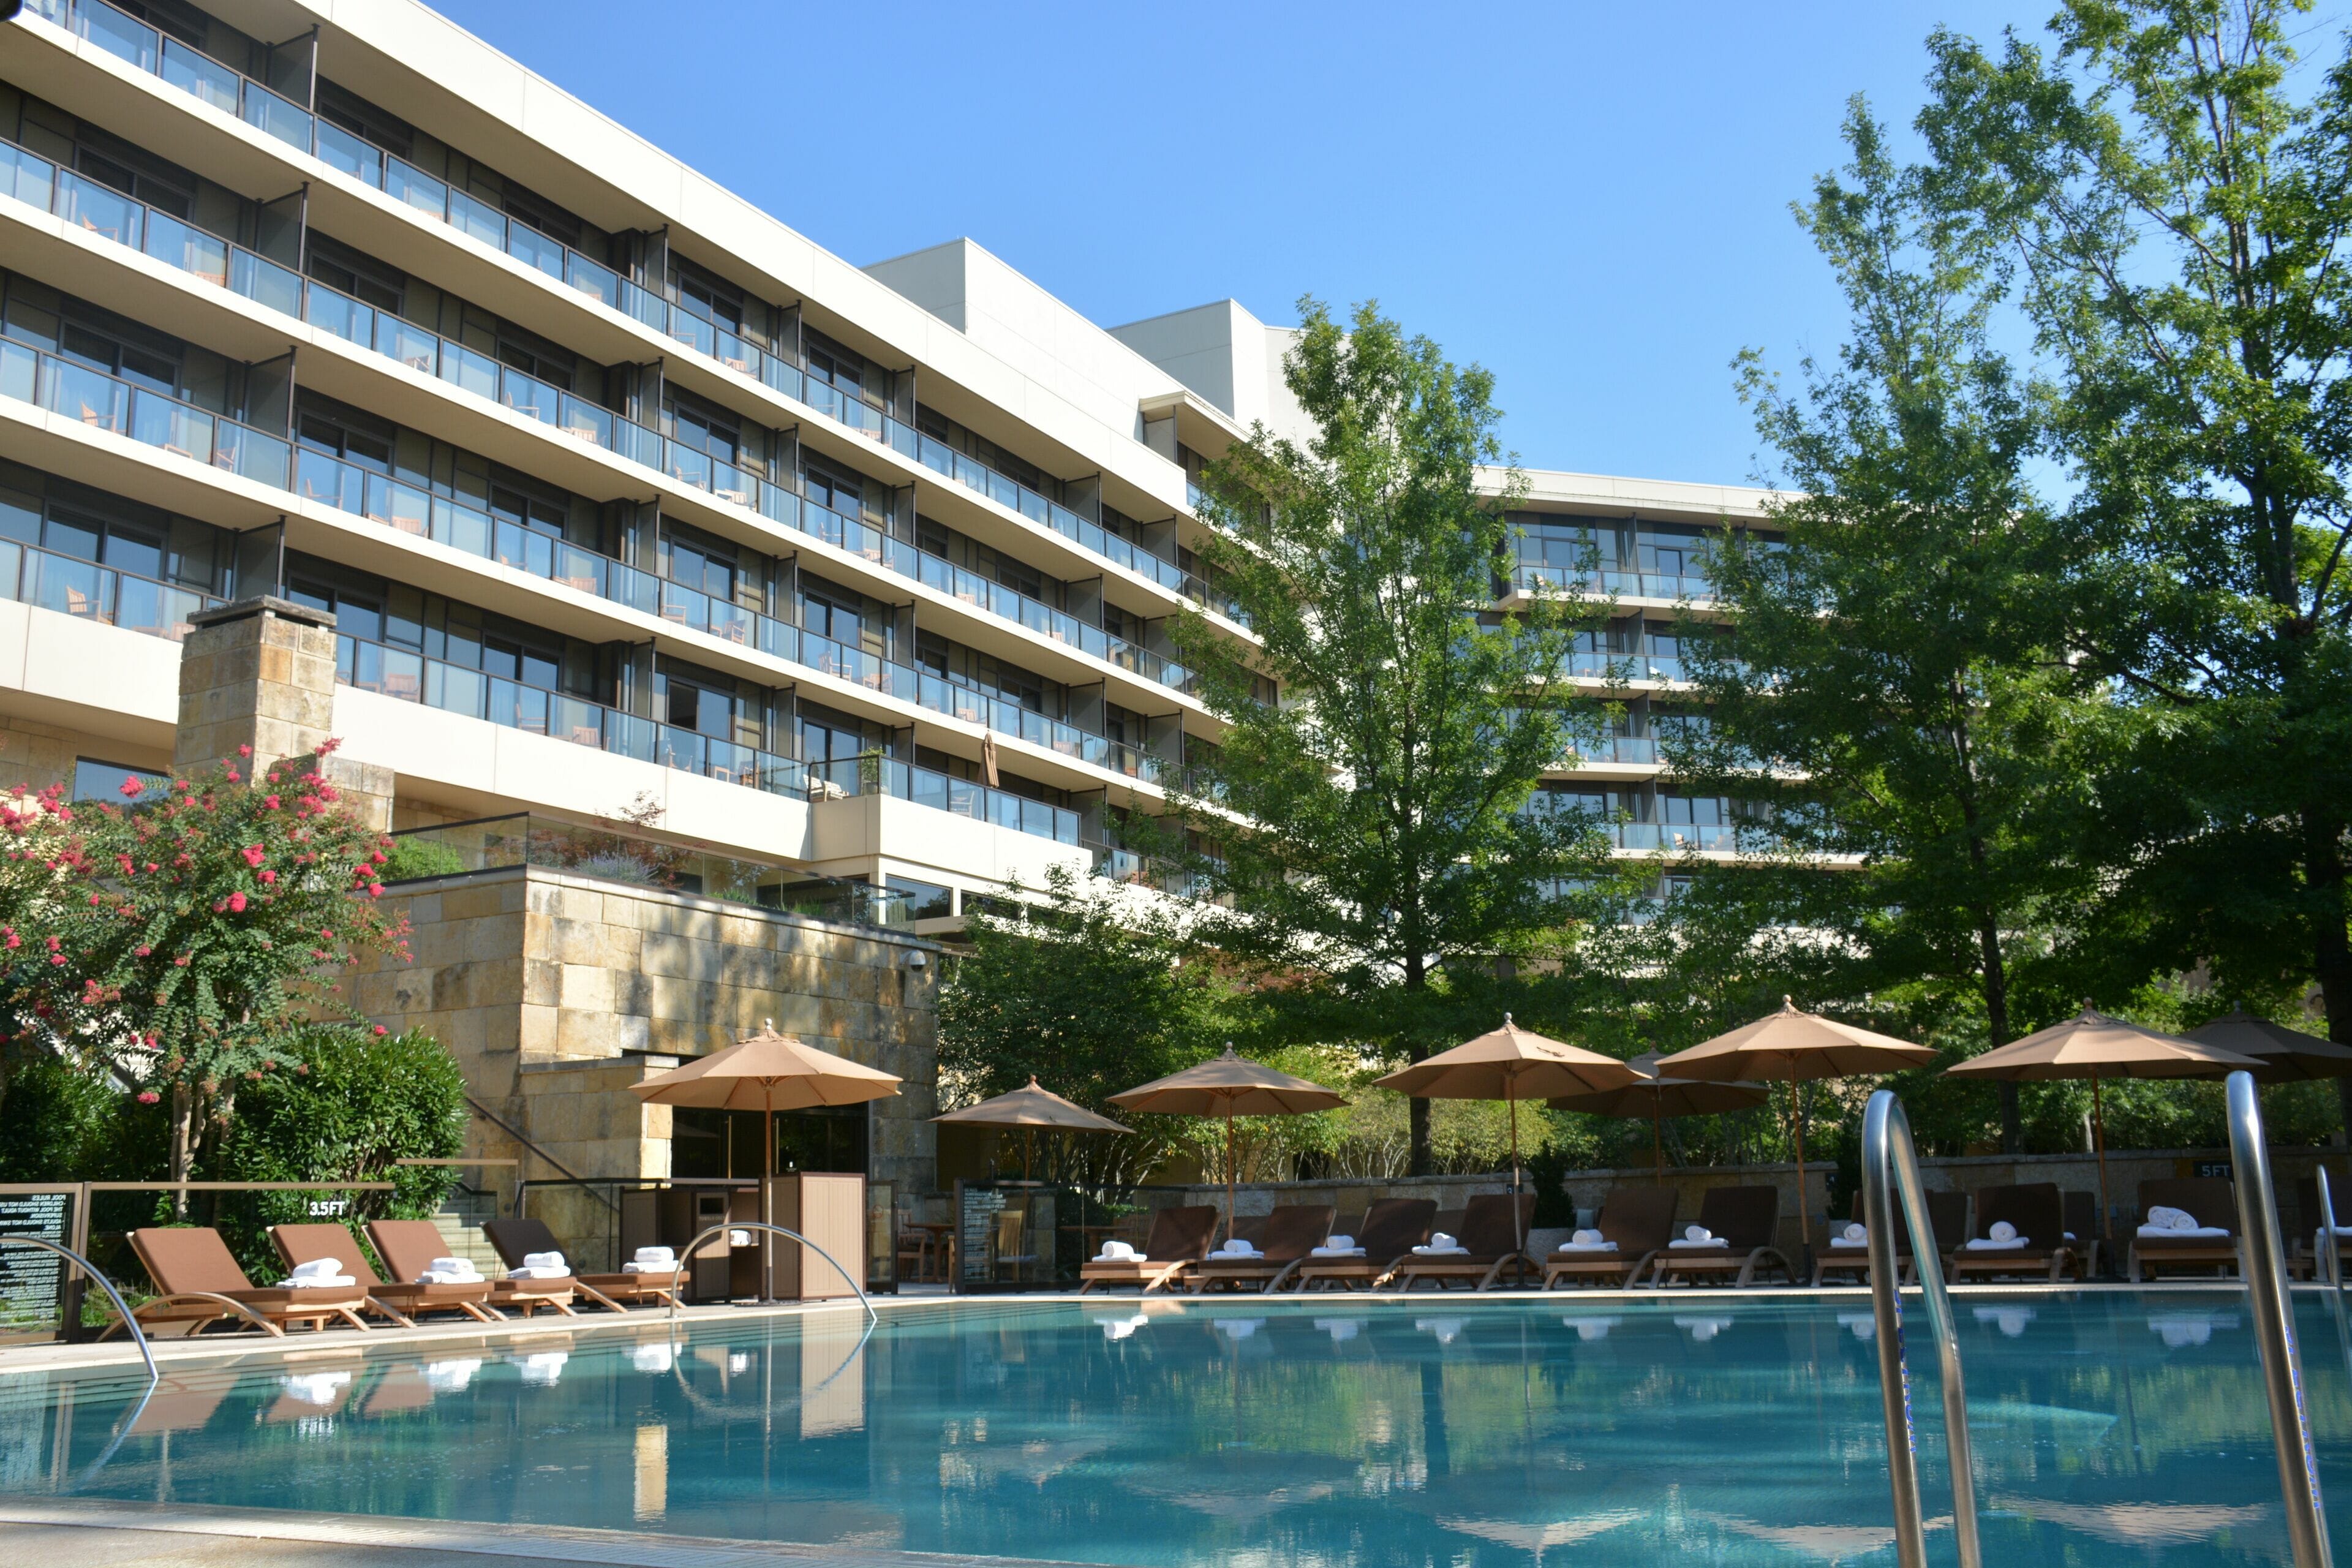 Pool view of The Umstead Hotel and Spa